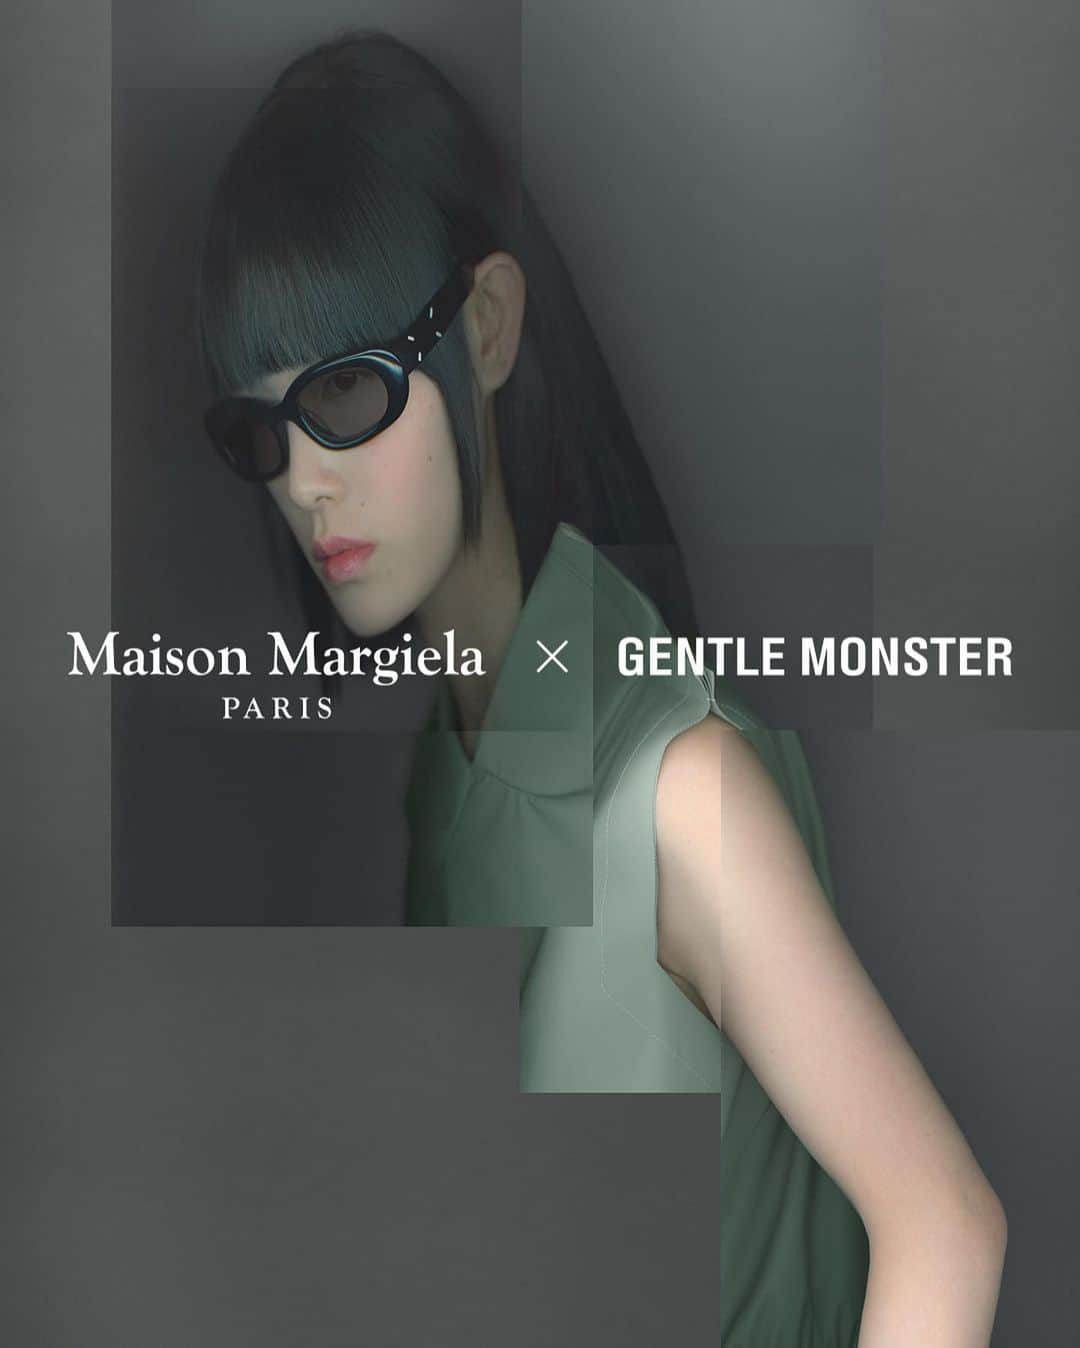 GENTLE MONSTERのインスタグラム：「Maison Margiela × Gentle Monster ⁣ ⁣ The four stitch details are relentlessly threaded on the side of the black acetate frames embodying the uncompromised value of creativity and self-expression of the two brands. ⁣ ⁣ Register for the early notification via link in bio to shop the Maison Margiela × Gentle Monster eyewear collection of the⁣ global launch on February 28th.⁣⁣⁣ ⁣⁣ #MaisonMargielaxGentleMonster⁣⁣ #GentleMonster」